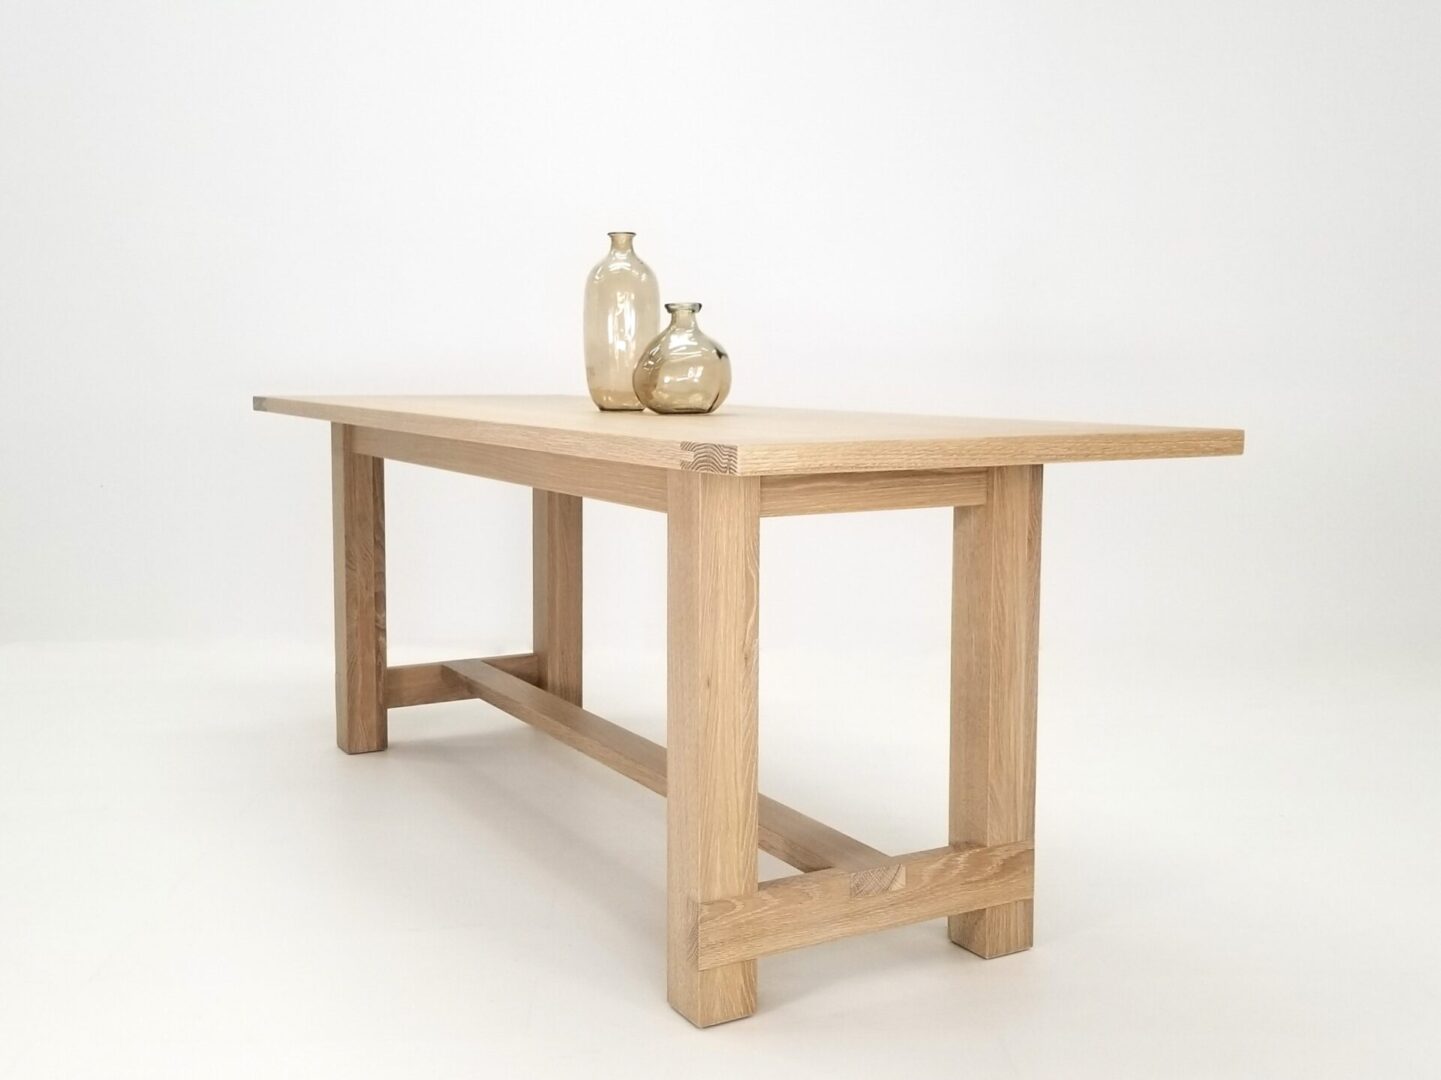 A white oak trestle table with vases on top of it.